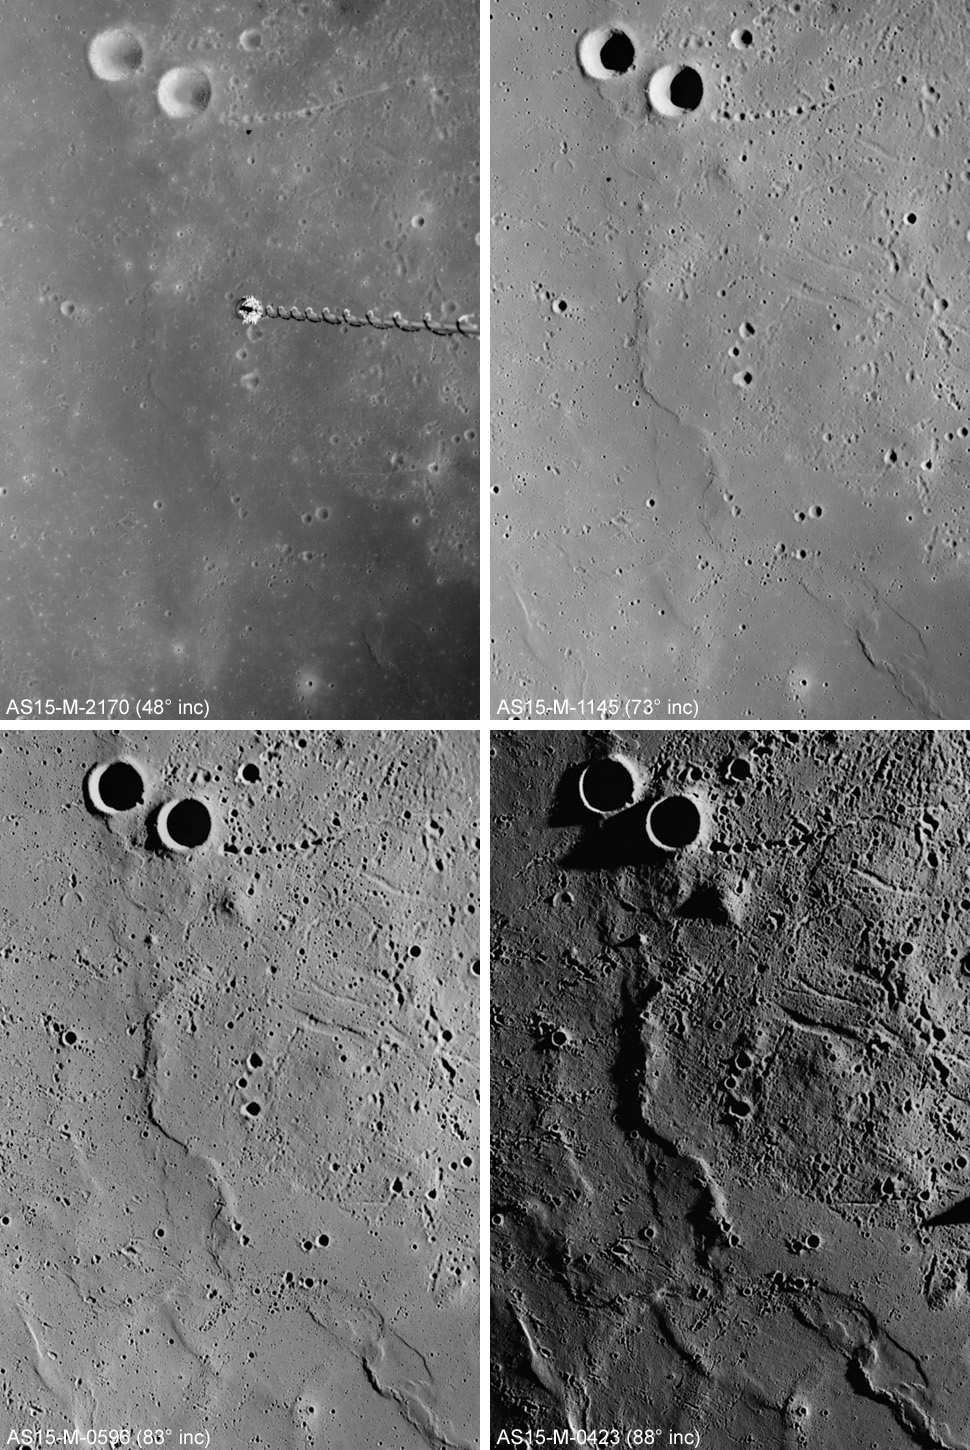 Apollo Metric Images (frame
				     IDs AS15-M-2170,AS15-M-1145,
				     AS15-M-0596, and
				     AS15-M-0423)